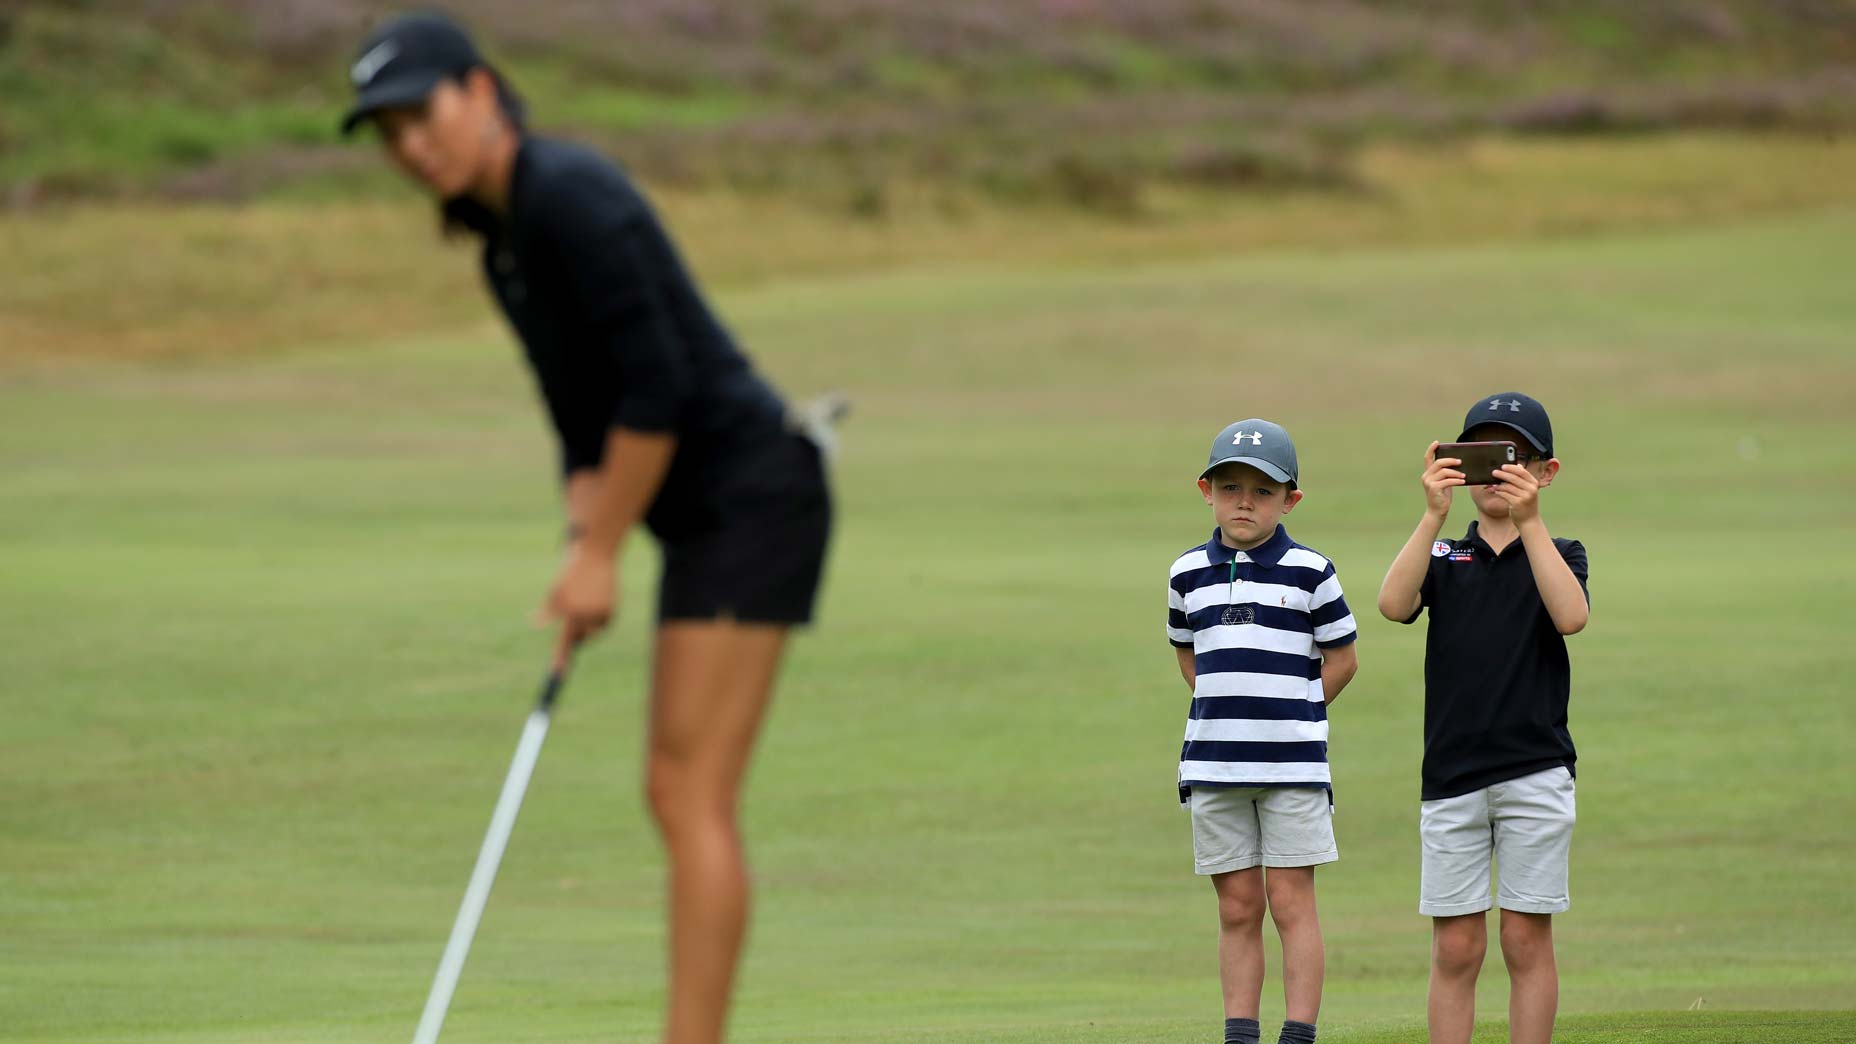 5 tips to get your kids interested golf, according Top 100 Teacher